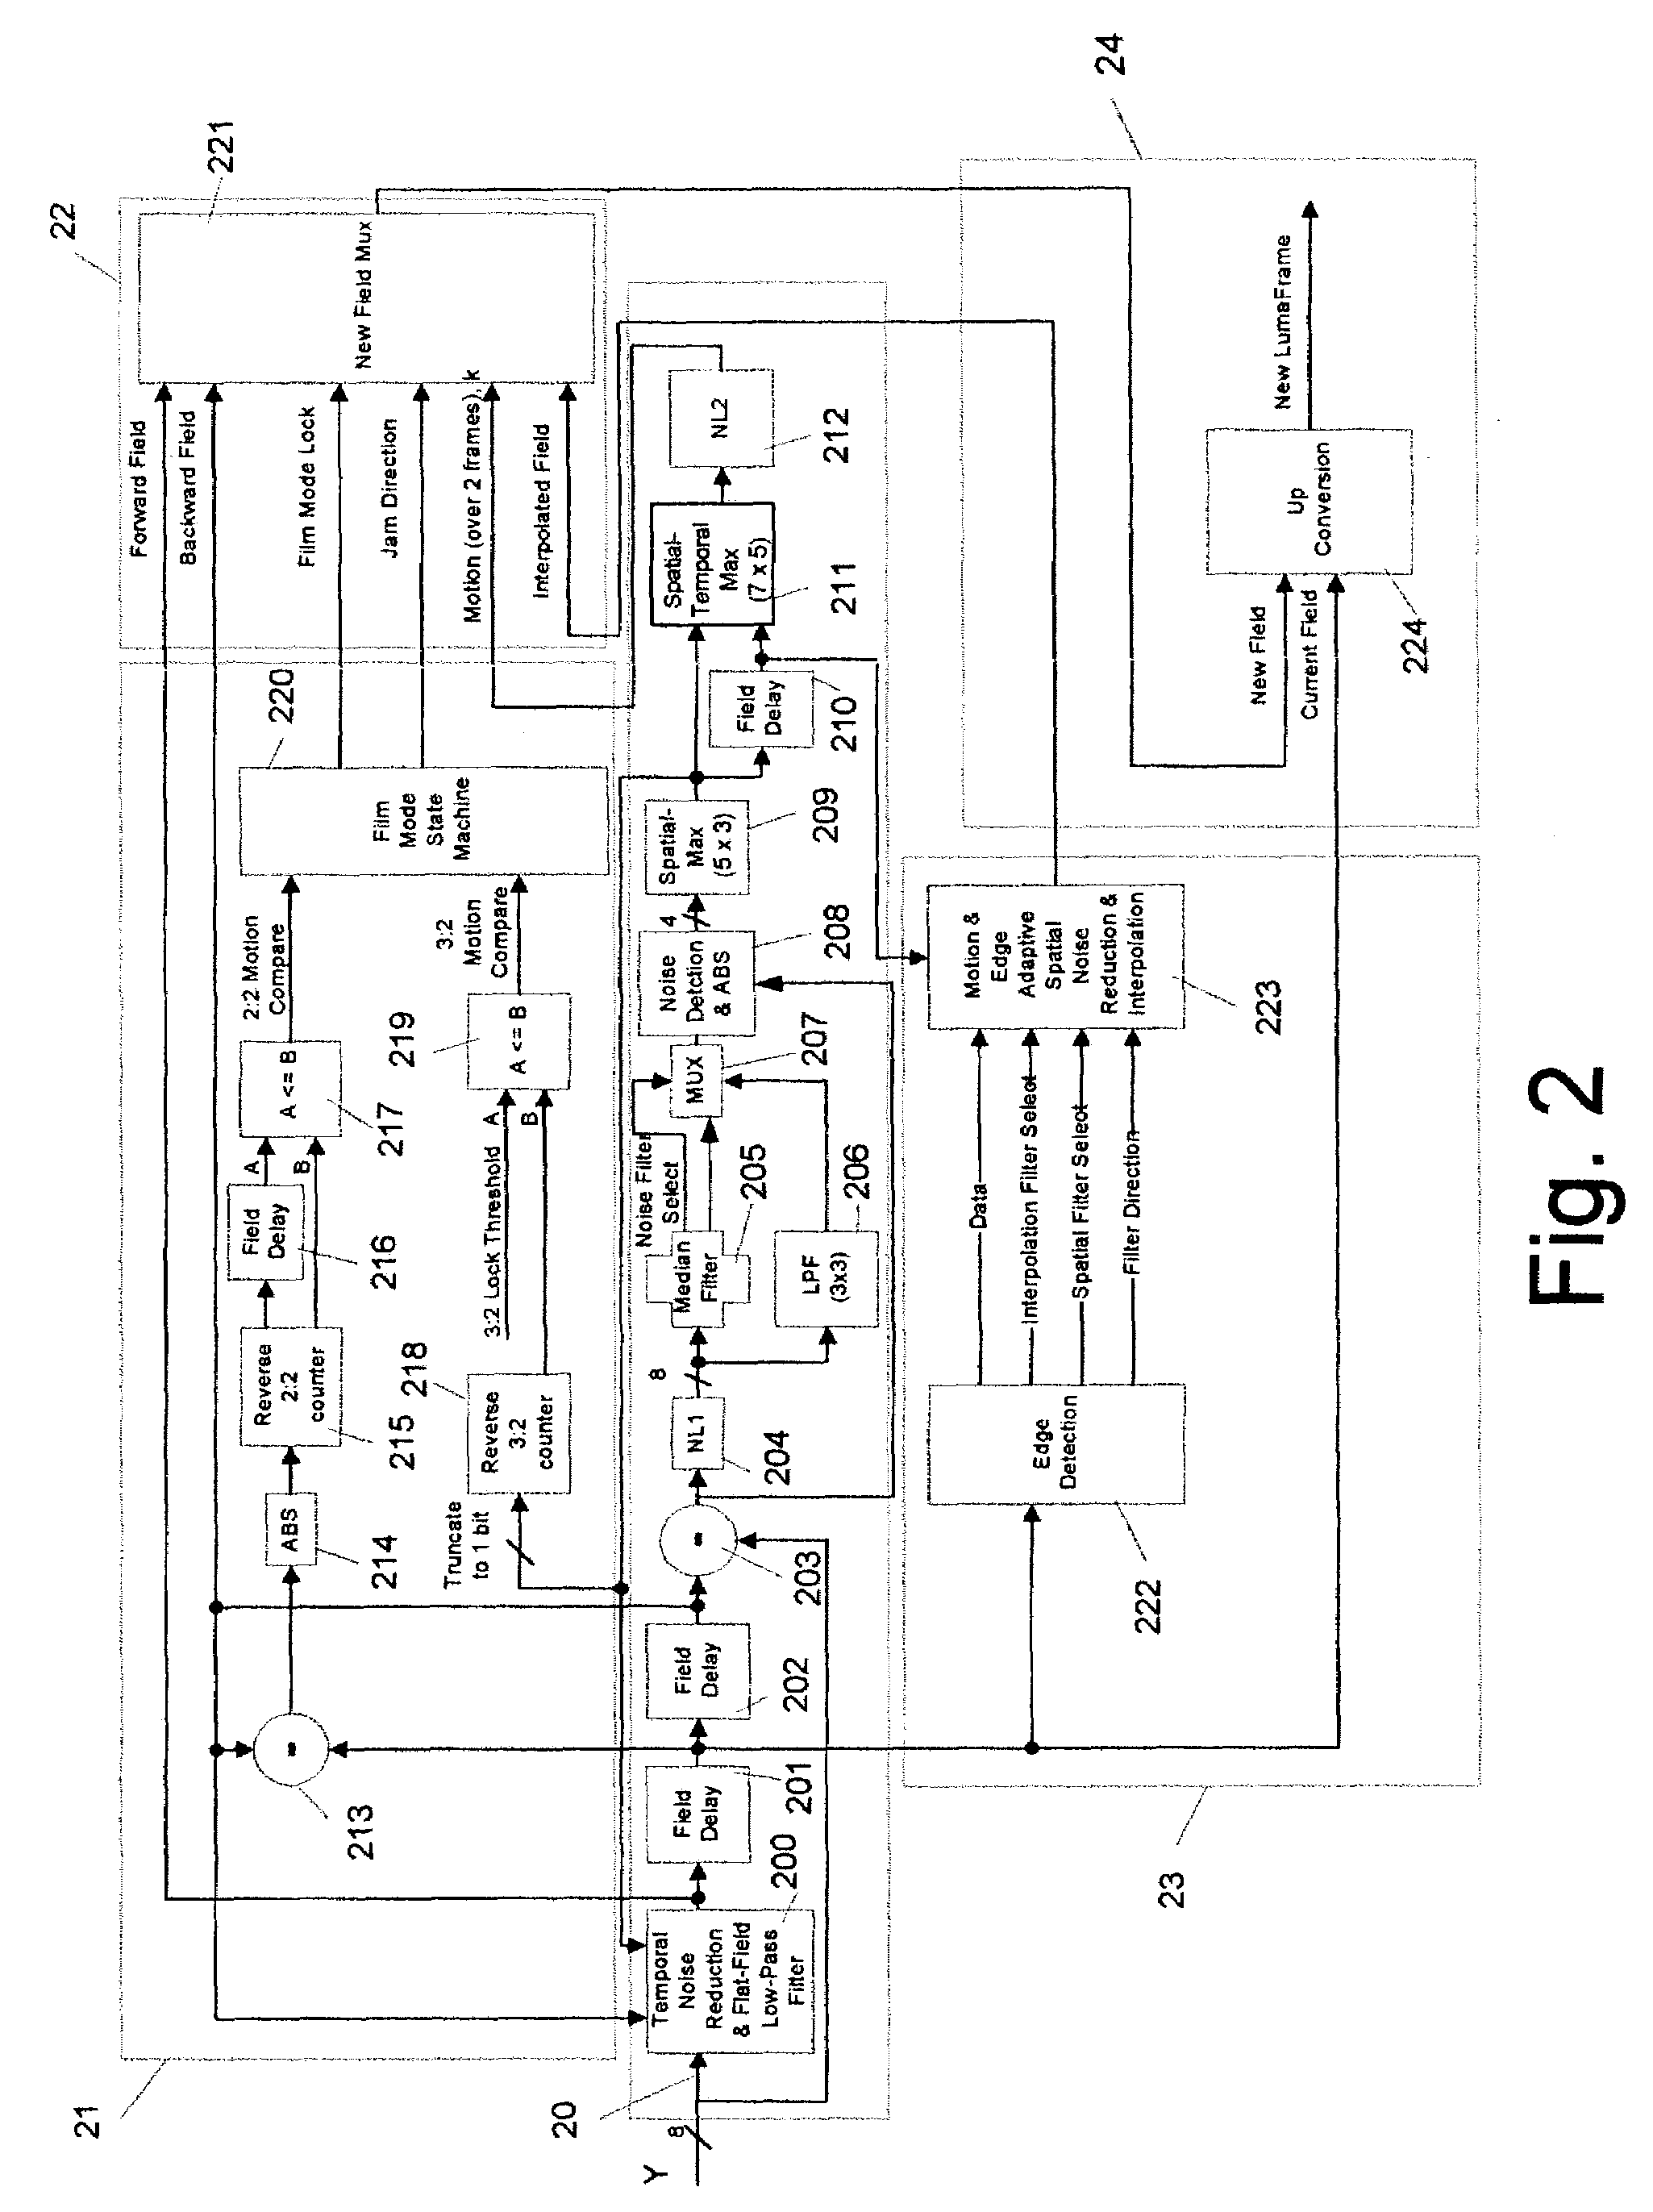 Content-dependent scan rate converter with adaptive noise reduction